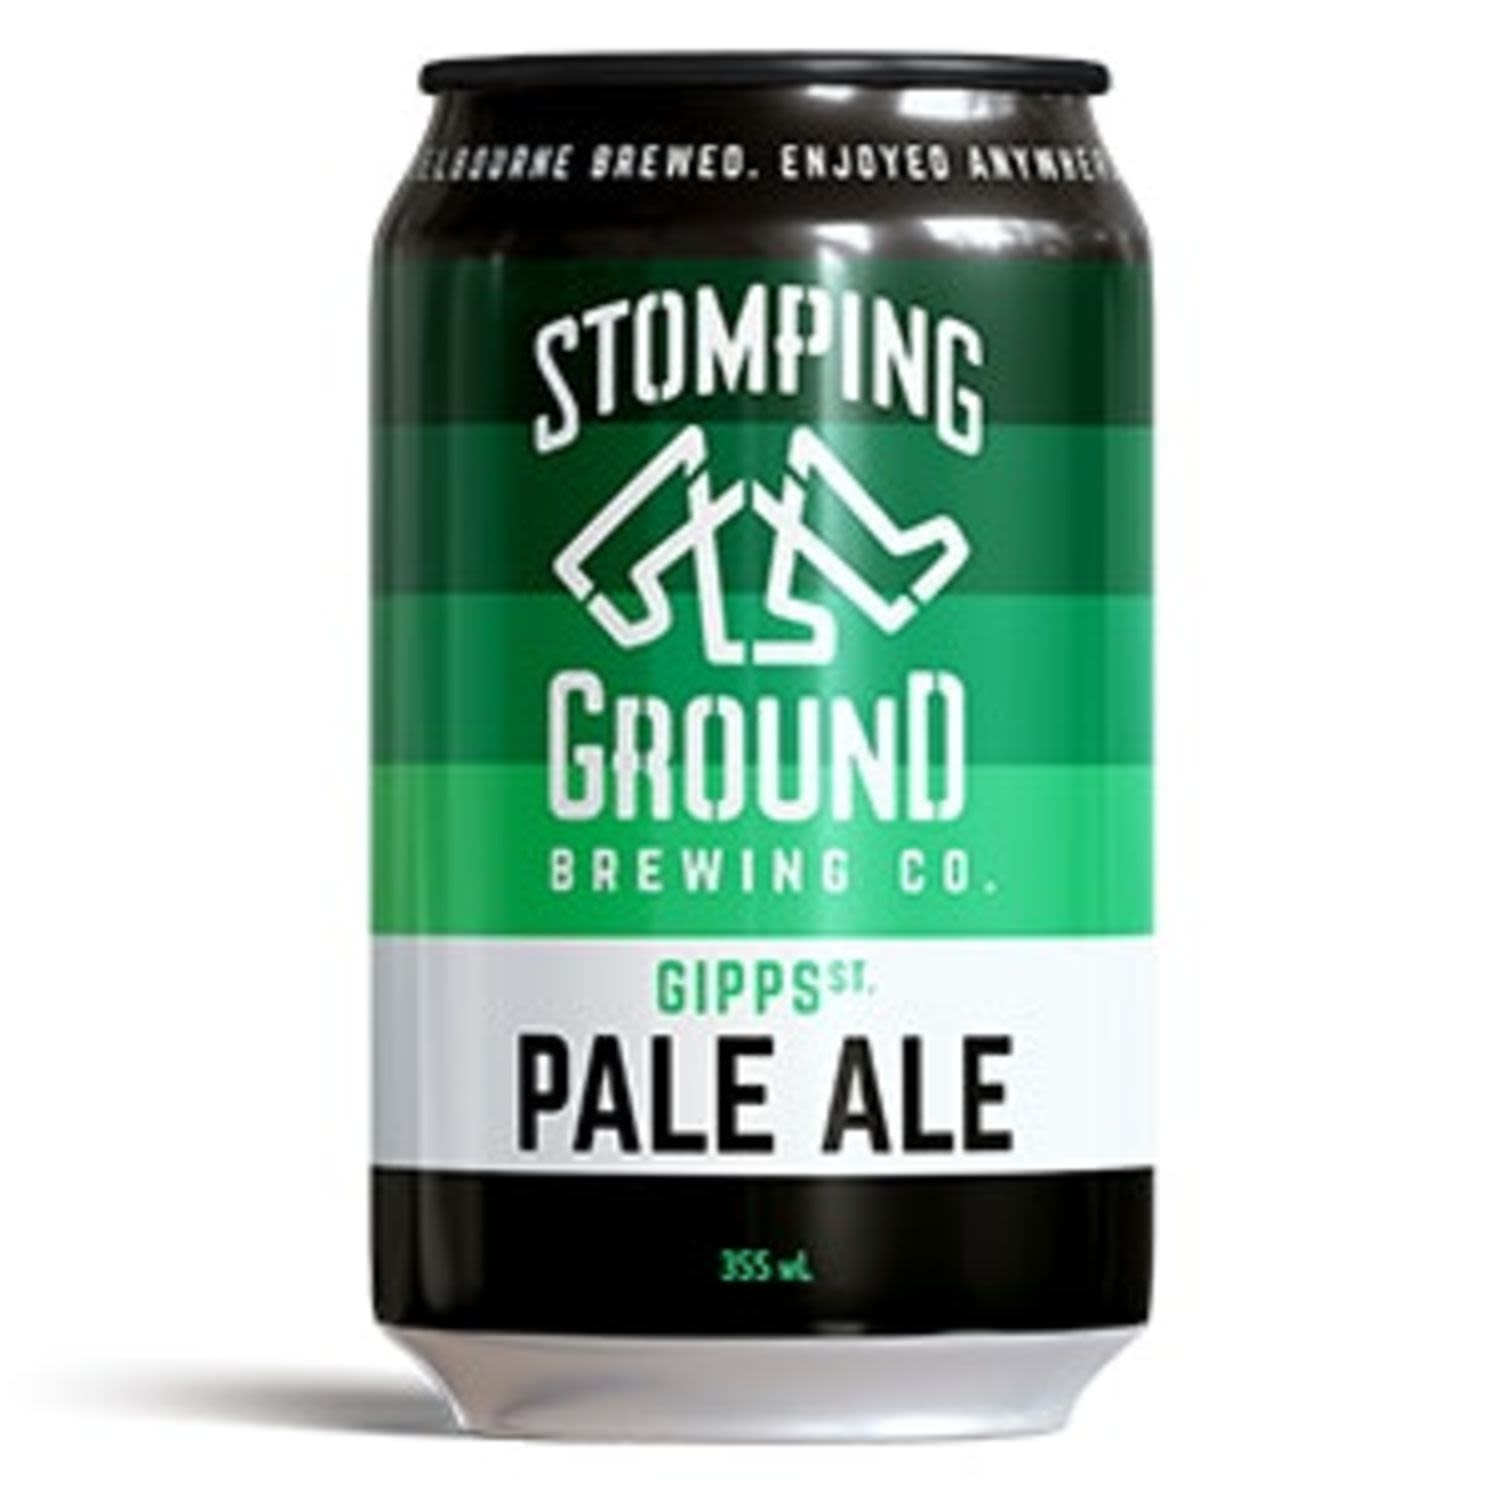 Stomping Ground Gipps St Pale Ale 355mL Can